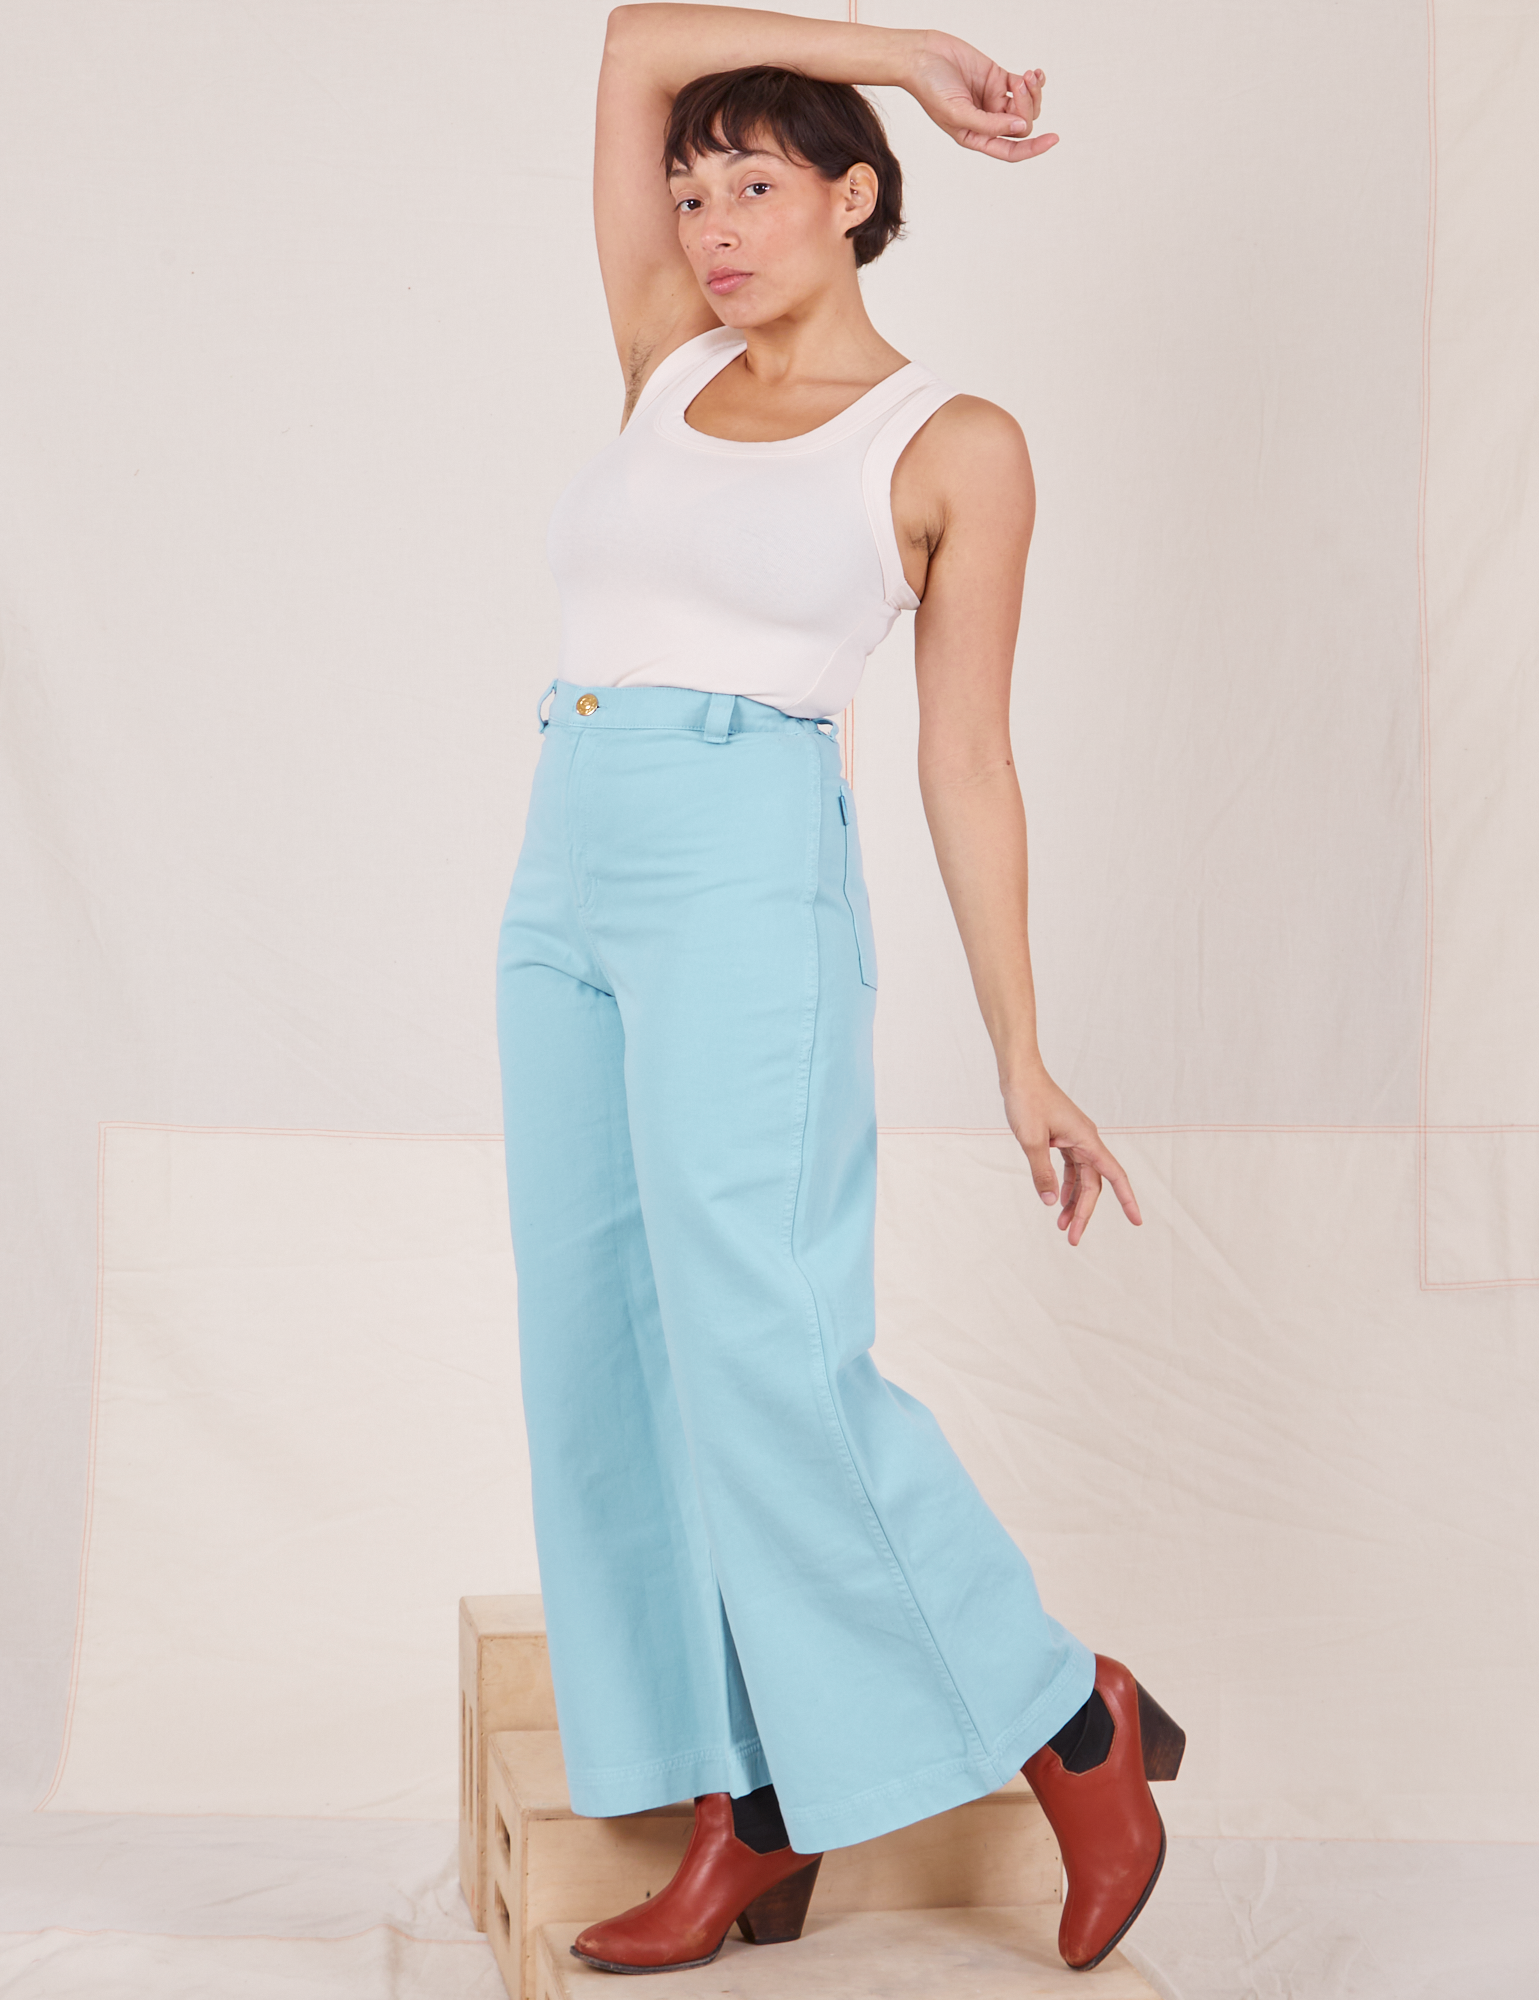 Tiara is wearing Bell Bottoms in Baby Blue and vintage off-white Tank Top